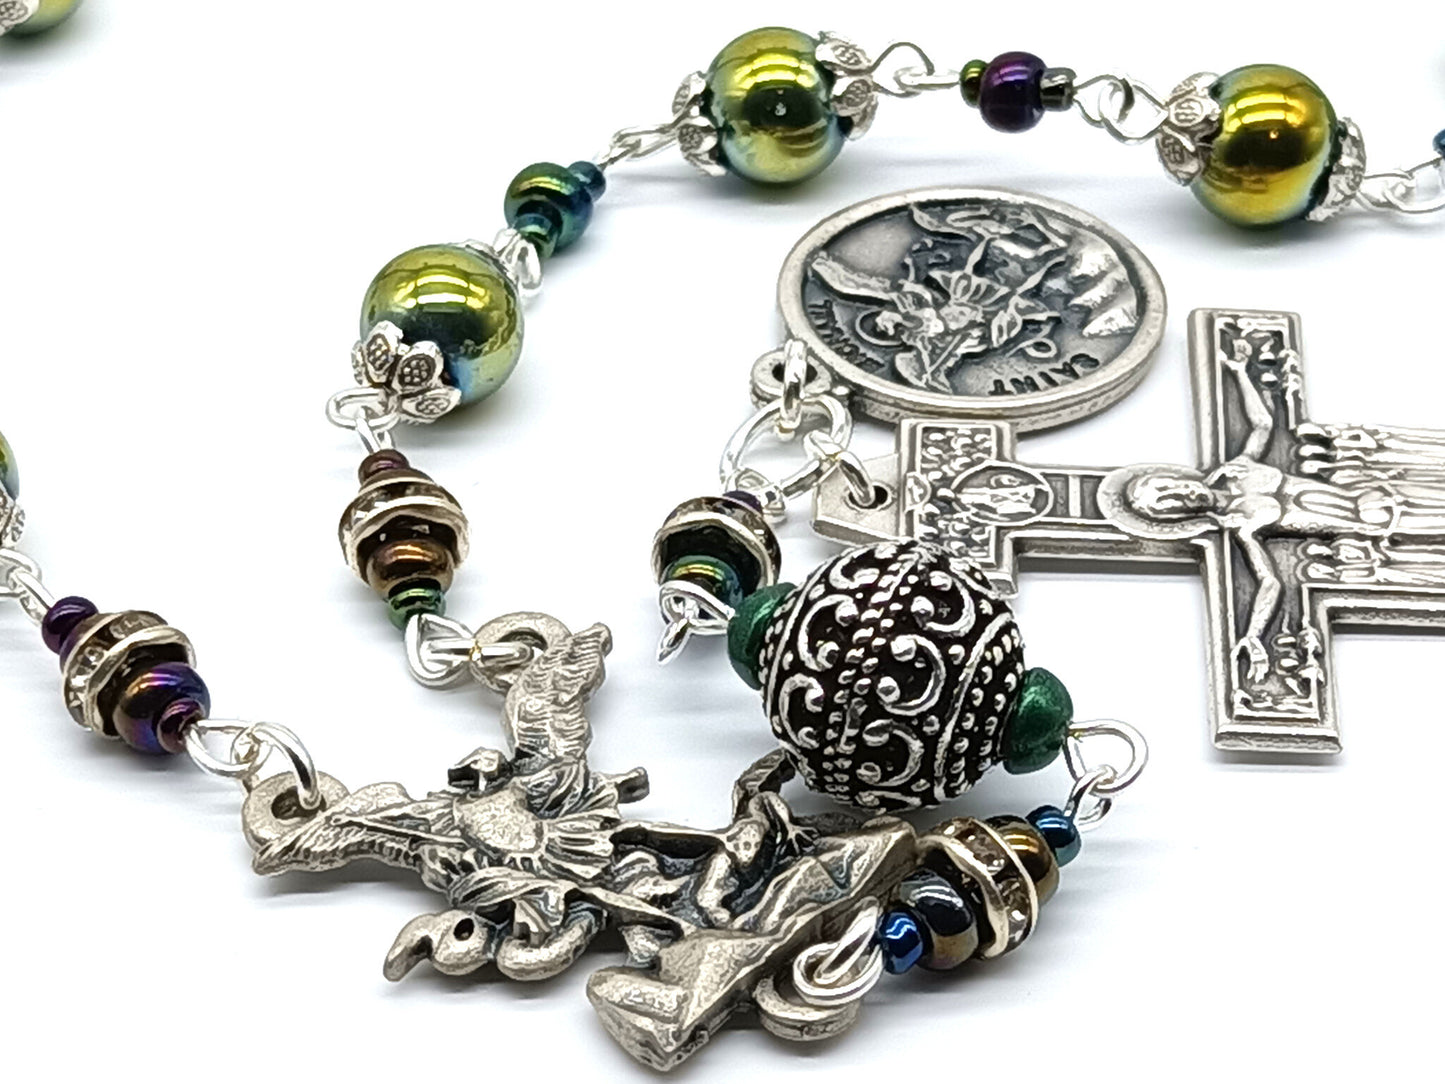 Saint Michael unique rosary beads single decade with green hematite beads, silver St. Francis crucifix, St. Michael centre medal and small medal.